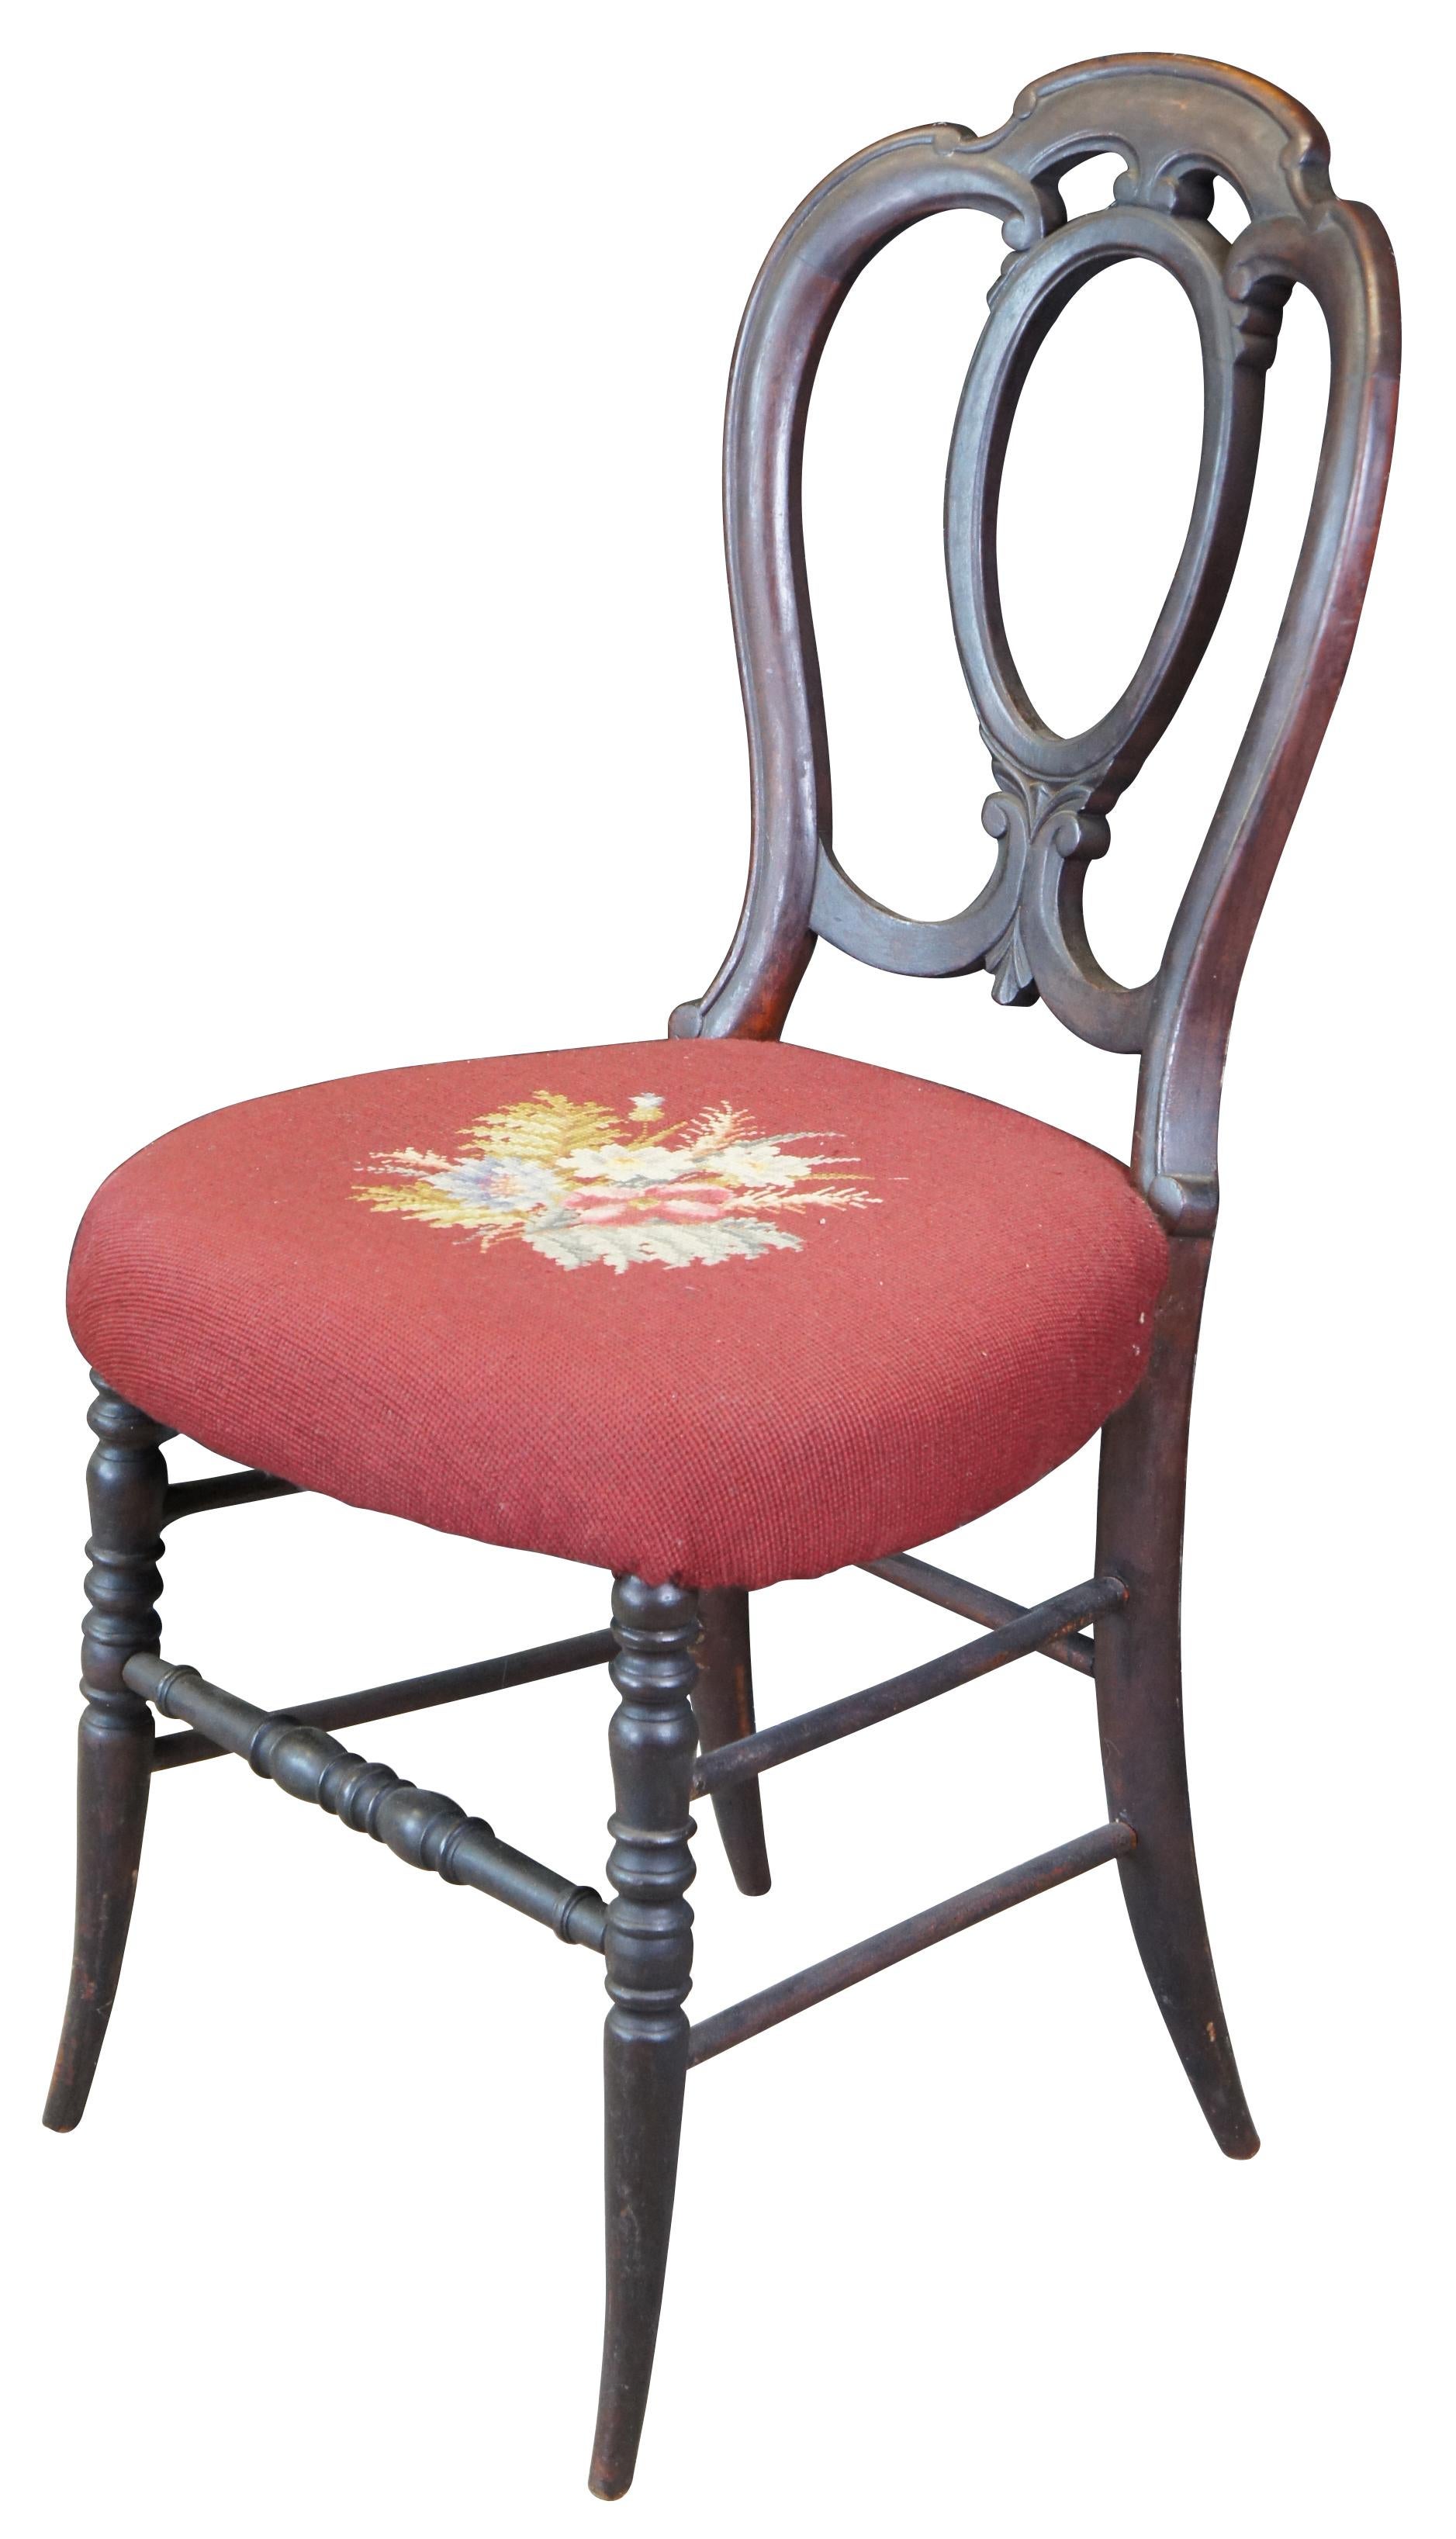 Antique 19th century balloon back chair. Made of mahogany featuring serpentine form with balloon shaped back, needlepoint seat and turned accents.
     